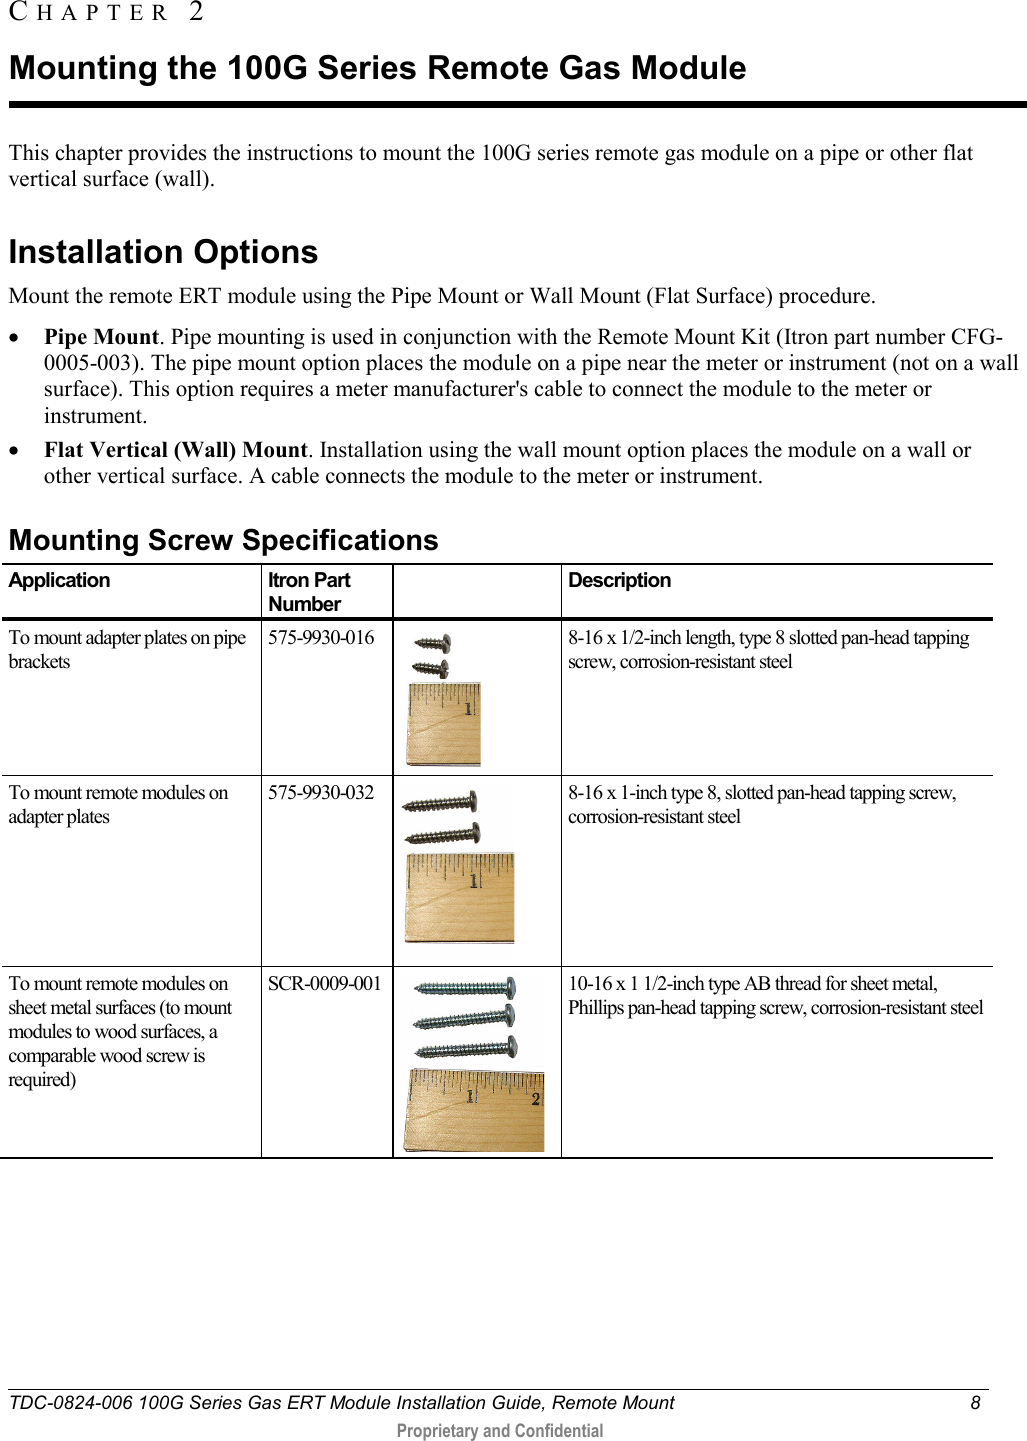  TDC-0824-006 100G Series Gas ERT Module Installation Guide, Remote Mount  8   Proprietary and Confidential     This chapter provides the instructions to mount the 100G series remote gas module on a pipe or other flat vertical surface (wall).   Installation Options Mount the remote ERT module using the Pipe Mount or Wall Mount (Flat Surface) procedure. • Pipe Mount. Pipe mounting is used in conjunction with the Remote Mount Kit (Itron part number CFG-0005-003). The pipe mount option places the module on a pipe near the meter or instrument (not on a wall surface). This option requires a meter manufacturer&apos;s cable to connect the module to the meter or instrument. • Flat Vertical (Wall) Mount. Installation using the wall mount option places the module on a wall or other vertical surface. A cable connects the module to the meter or instrument.   Mounting Screw Specifications Application Itron Part Number  Description To mount adapter plates on pipe brackets 575-9930-016  8-16 x 1/2-inch length, type 8 slotted pan-head tapping screw, corrosion-resistant steel To mount remote modules on adapter plates 575-9930-032  8-16 x 1-inch type 8, slotted pan-head tapping screw, corrosion-resistant steel To mount remote modules on sheet metal surfaces (to mount modules to wood surfaces, a comparable wood screw is required) SCR-0009-001  10-16 x 1 1/2-inch type AB thread for sheet metal, Phillips pan-head tapping screw, corrosion-resistant steel   CHAPTER  2  Mounting the 100G Series Remote Gas Module 